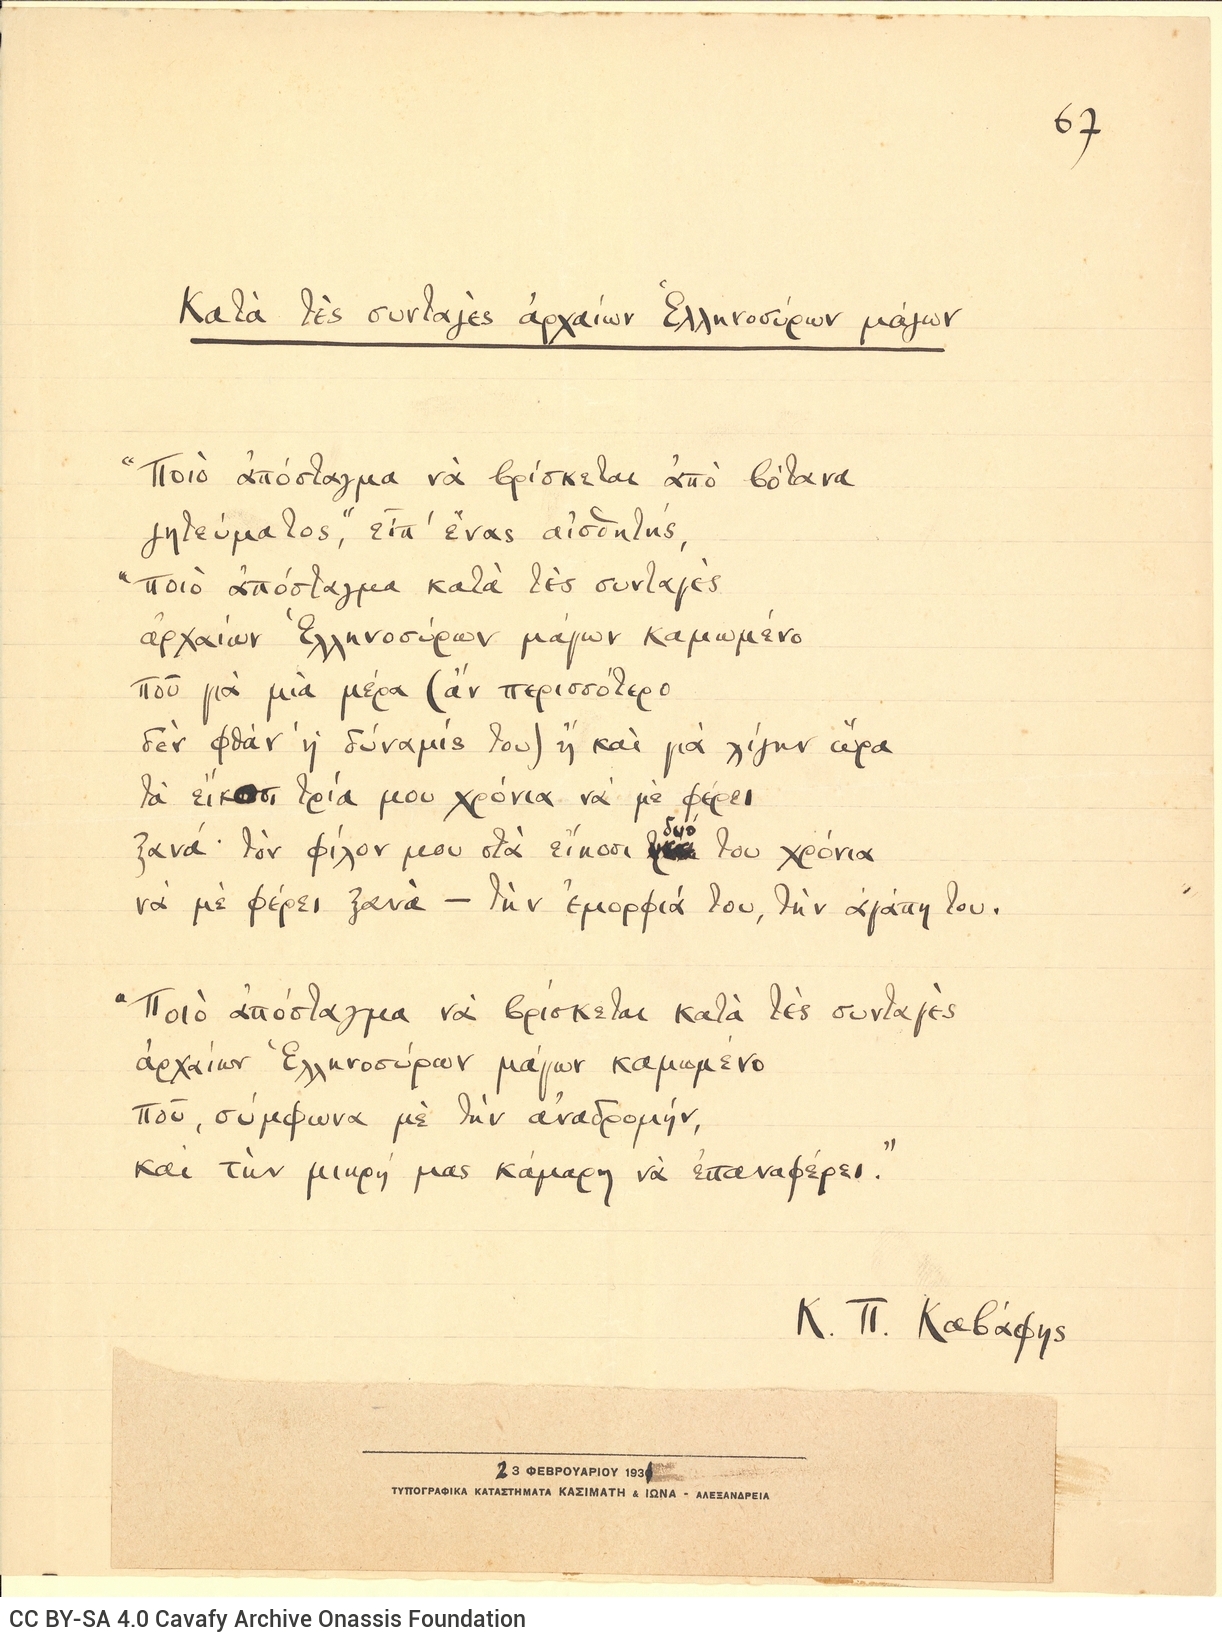 Autograph manuscript of the poem "According to the Formulas of Ancient Greco-Syrian Magicians" one one side of a ruled sheet.